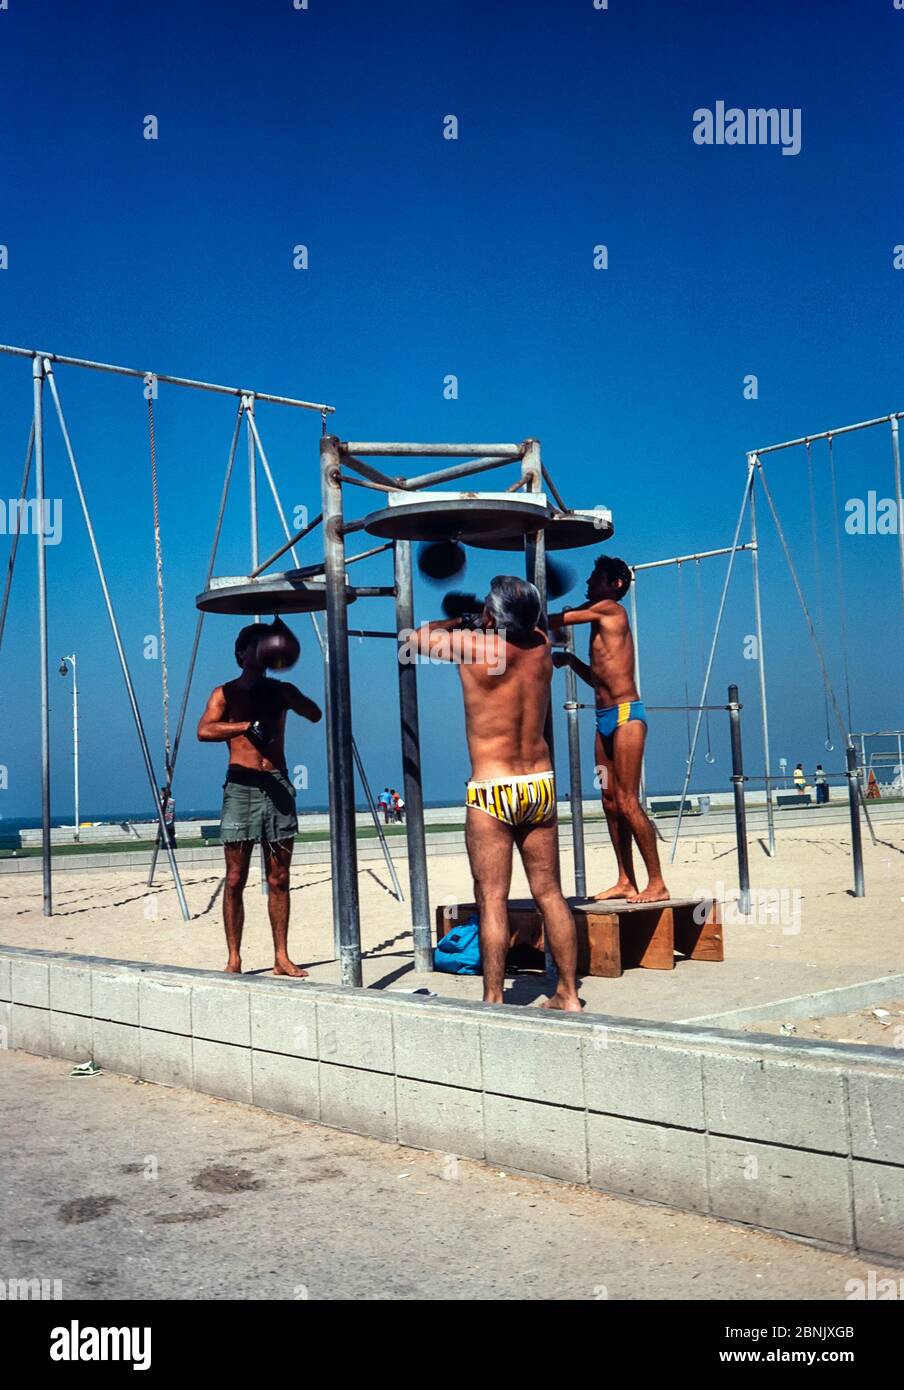 Venice, California, USA - Aug 1980: People exercising using outdoor gym  equipment on the beach at Venice, Los Angeles, California.  Scanned 35mm film. Stock Photo